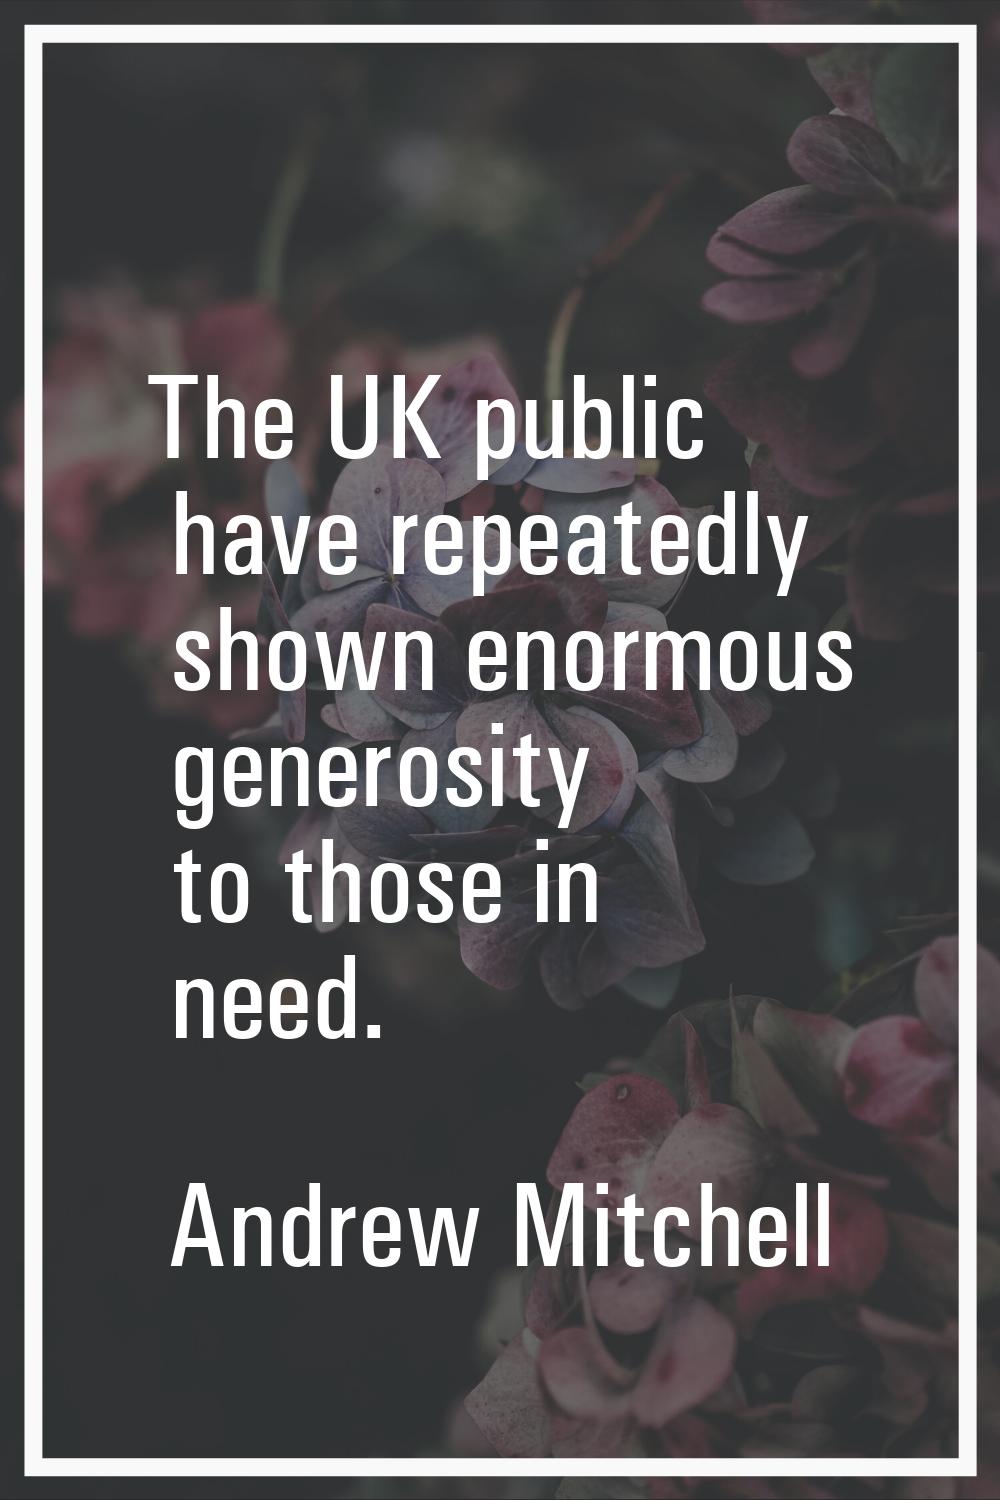 The UK public have repeatedly shown enormous generosity to those in need.